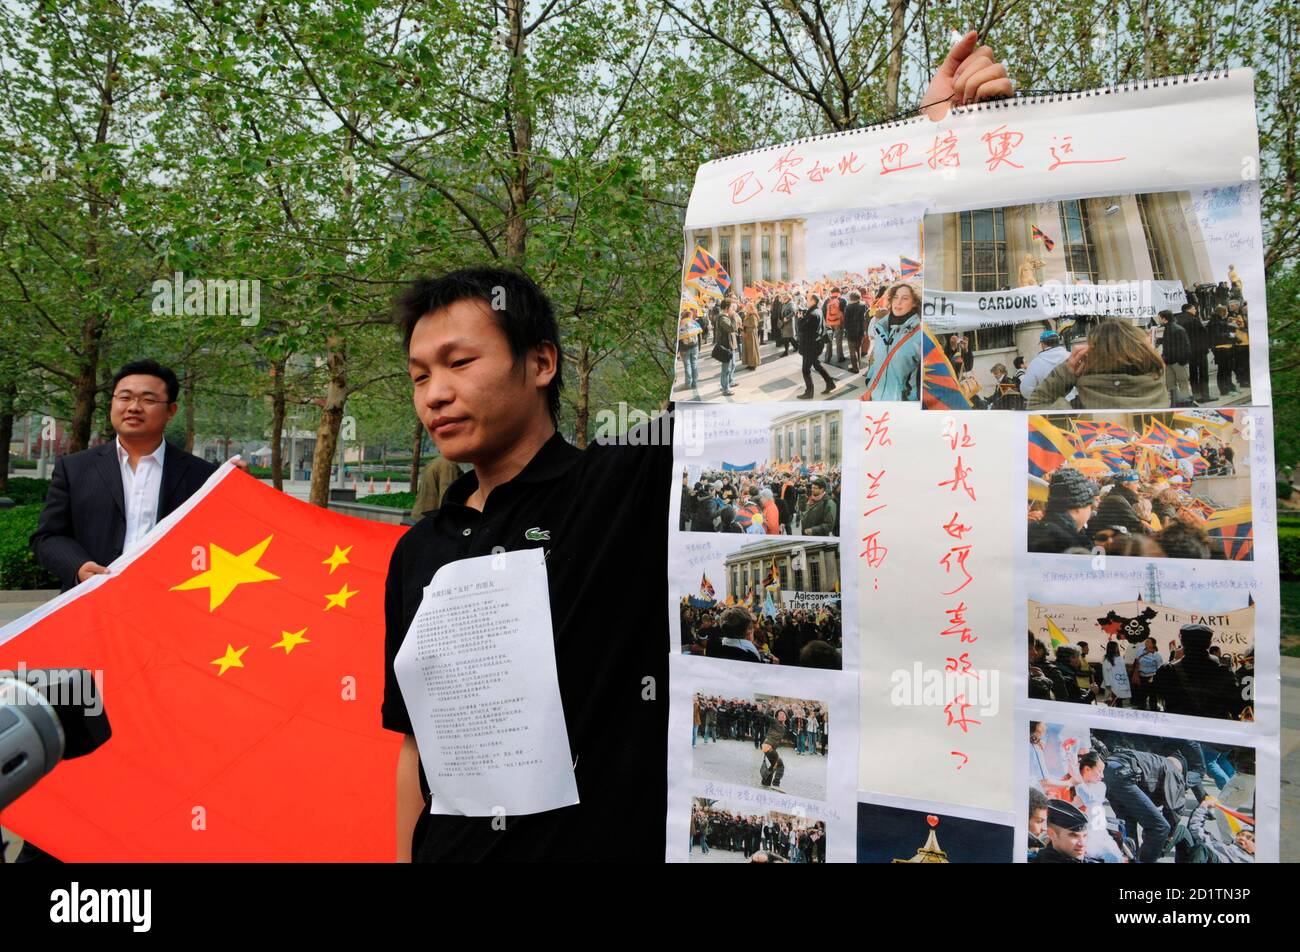 Lu Jixin holds a poster outside a branch of French hypermarket Carrefour in Beijing April 19, 2008 to demonstrate against the disruption of the Olympic torch relay in Paris. The messages on the poster read: 'This is how Paris welcomes the Olympics' and 'France: How can I like you?'. REUTERS/Joe Chan   (CHINA) Stock Photo